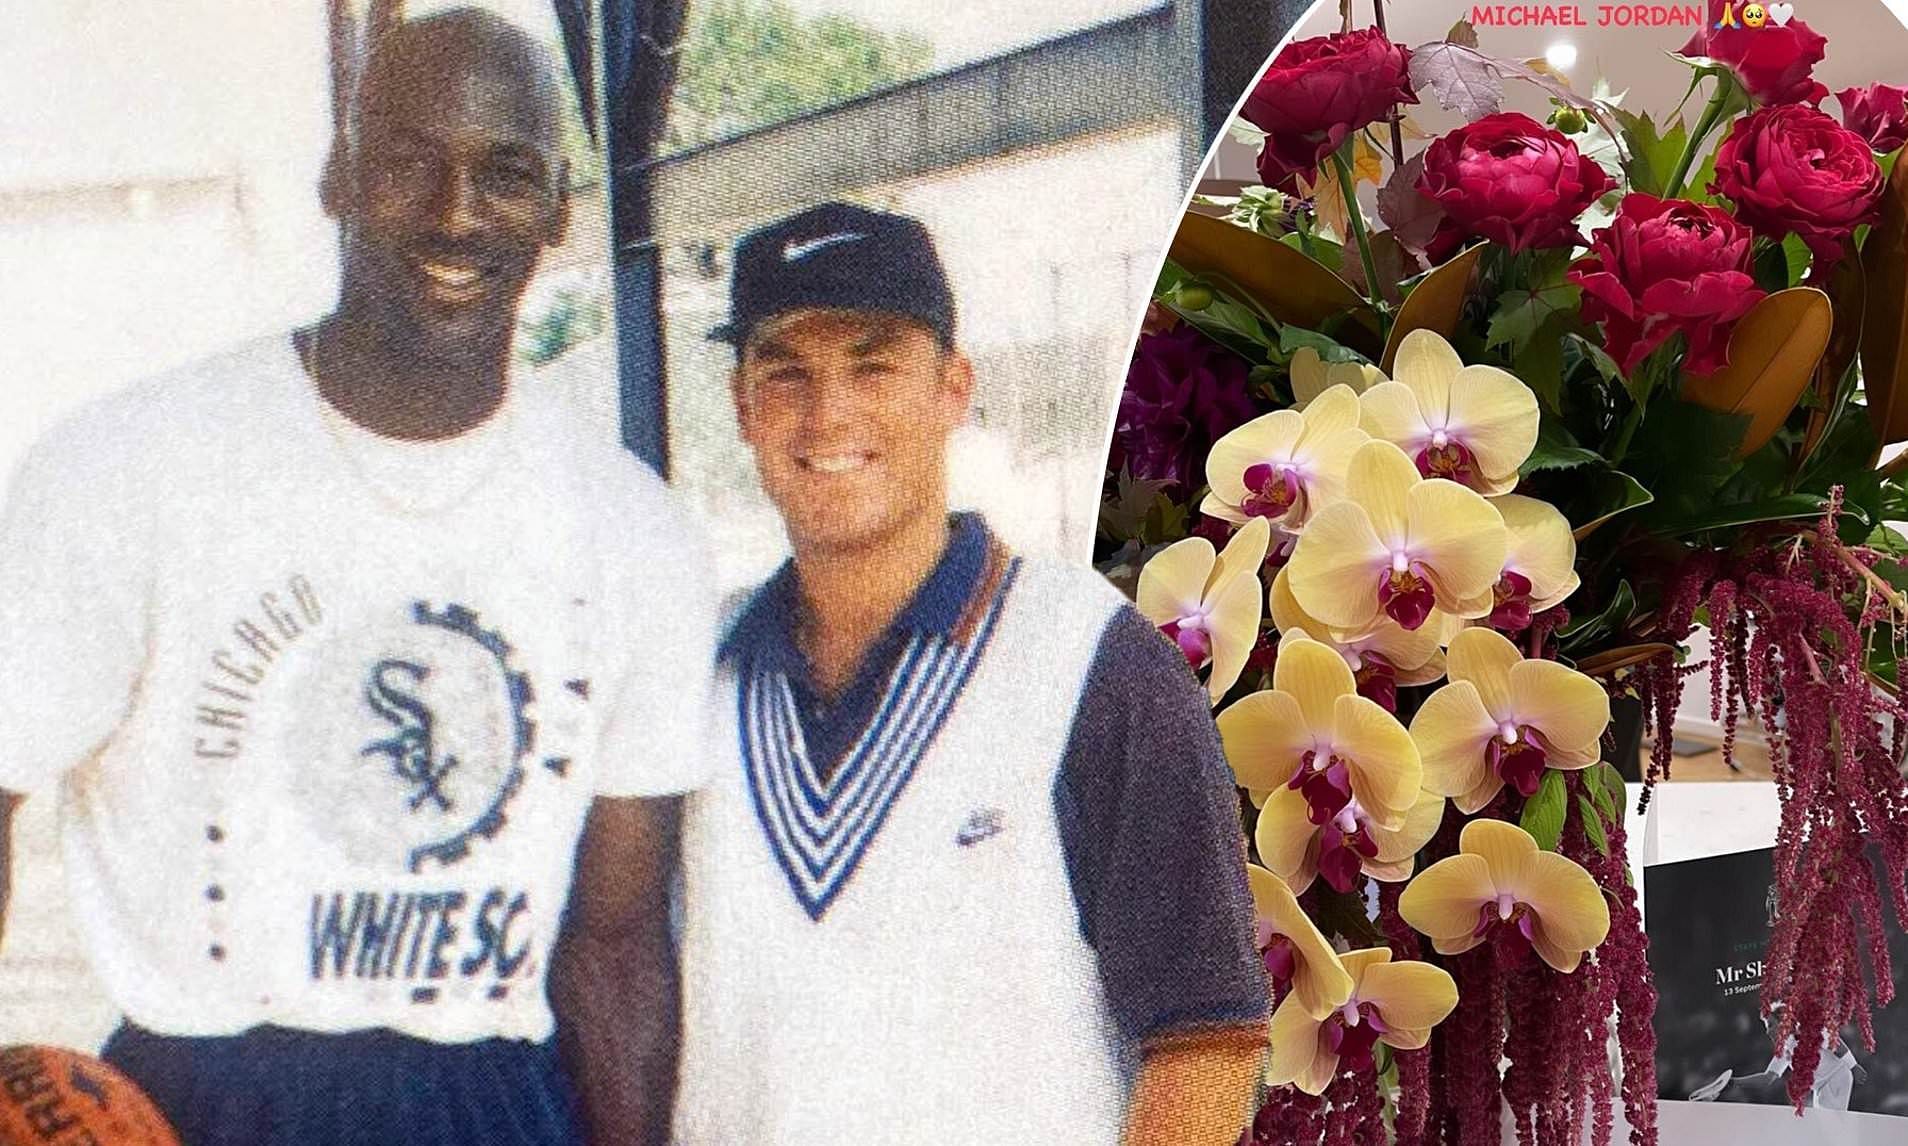 Michael Jordan and Shane Warne. (Photo: The Daily Mail)